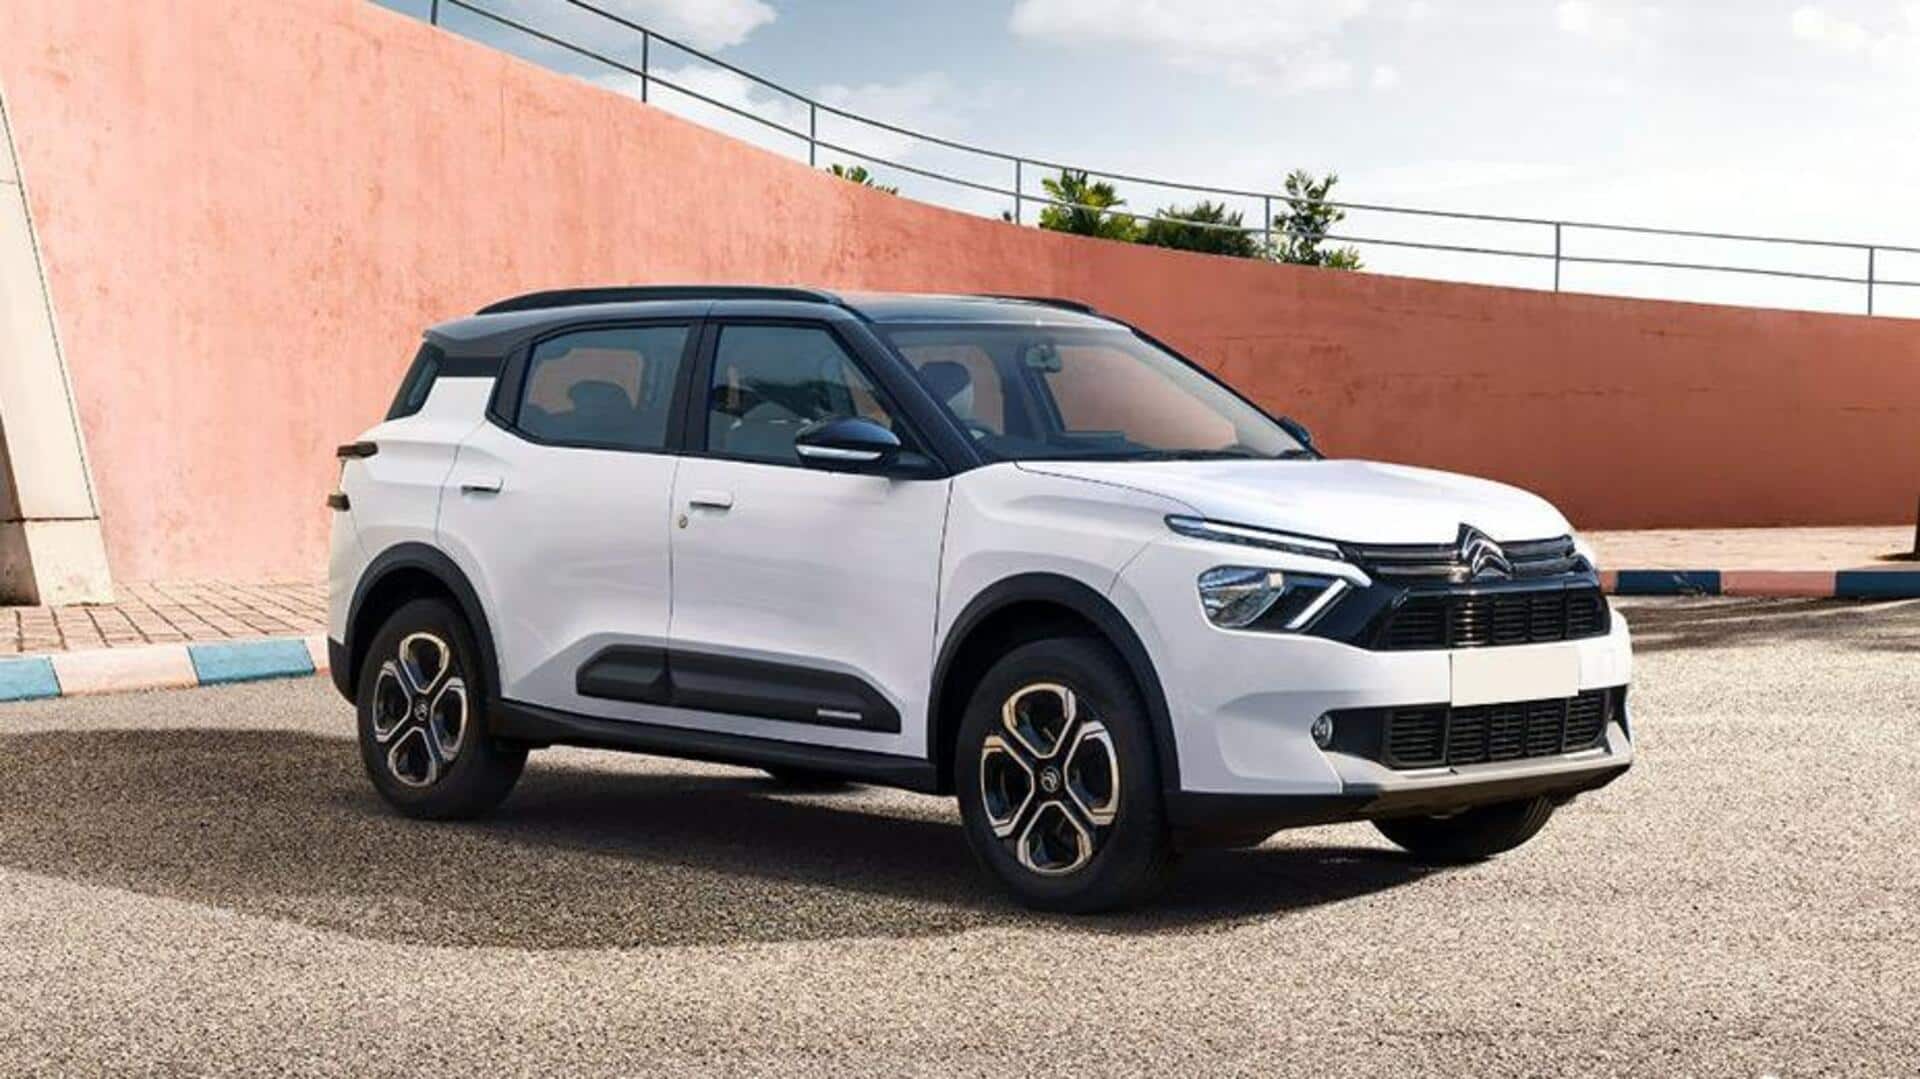 Citroen C3 Aircross bookings to open on September 15